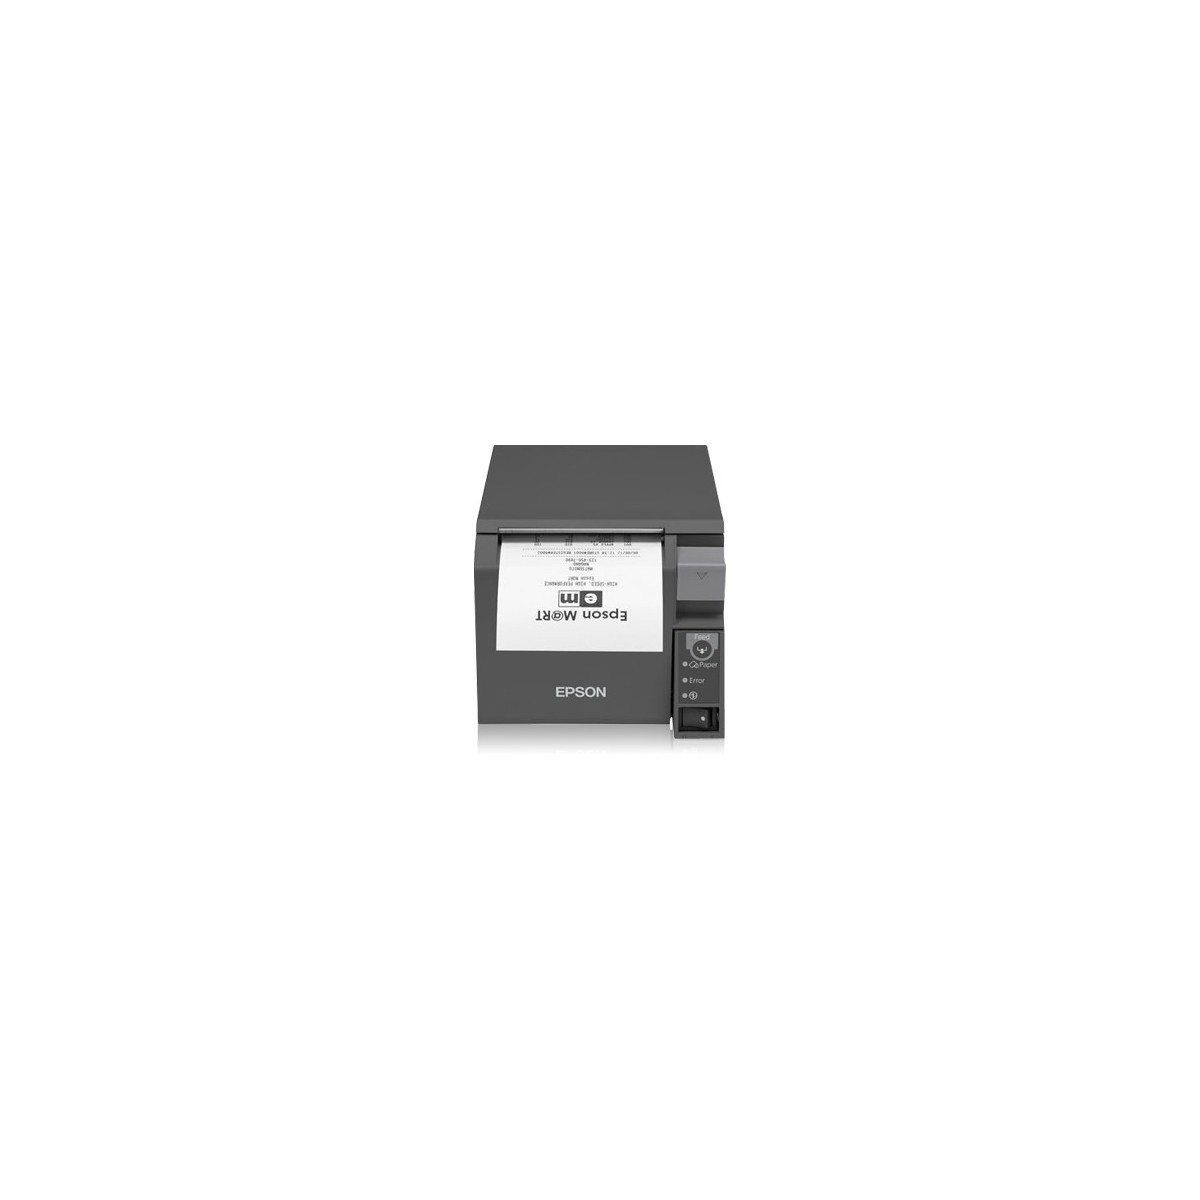 Epson TM-T70II (025A1) - Thermal - POS printer - 180 x 180 DPI - 250 mm/sec - 80 mm - Wired  Wireless